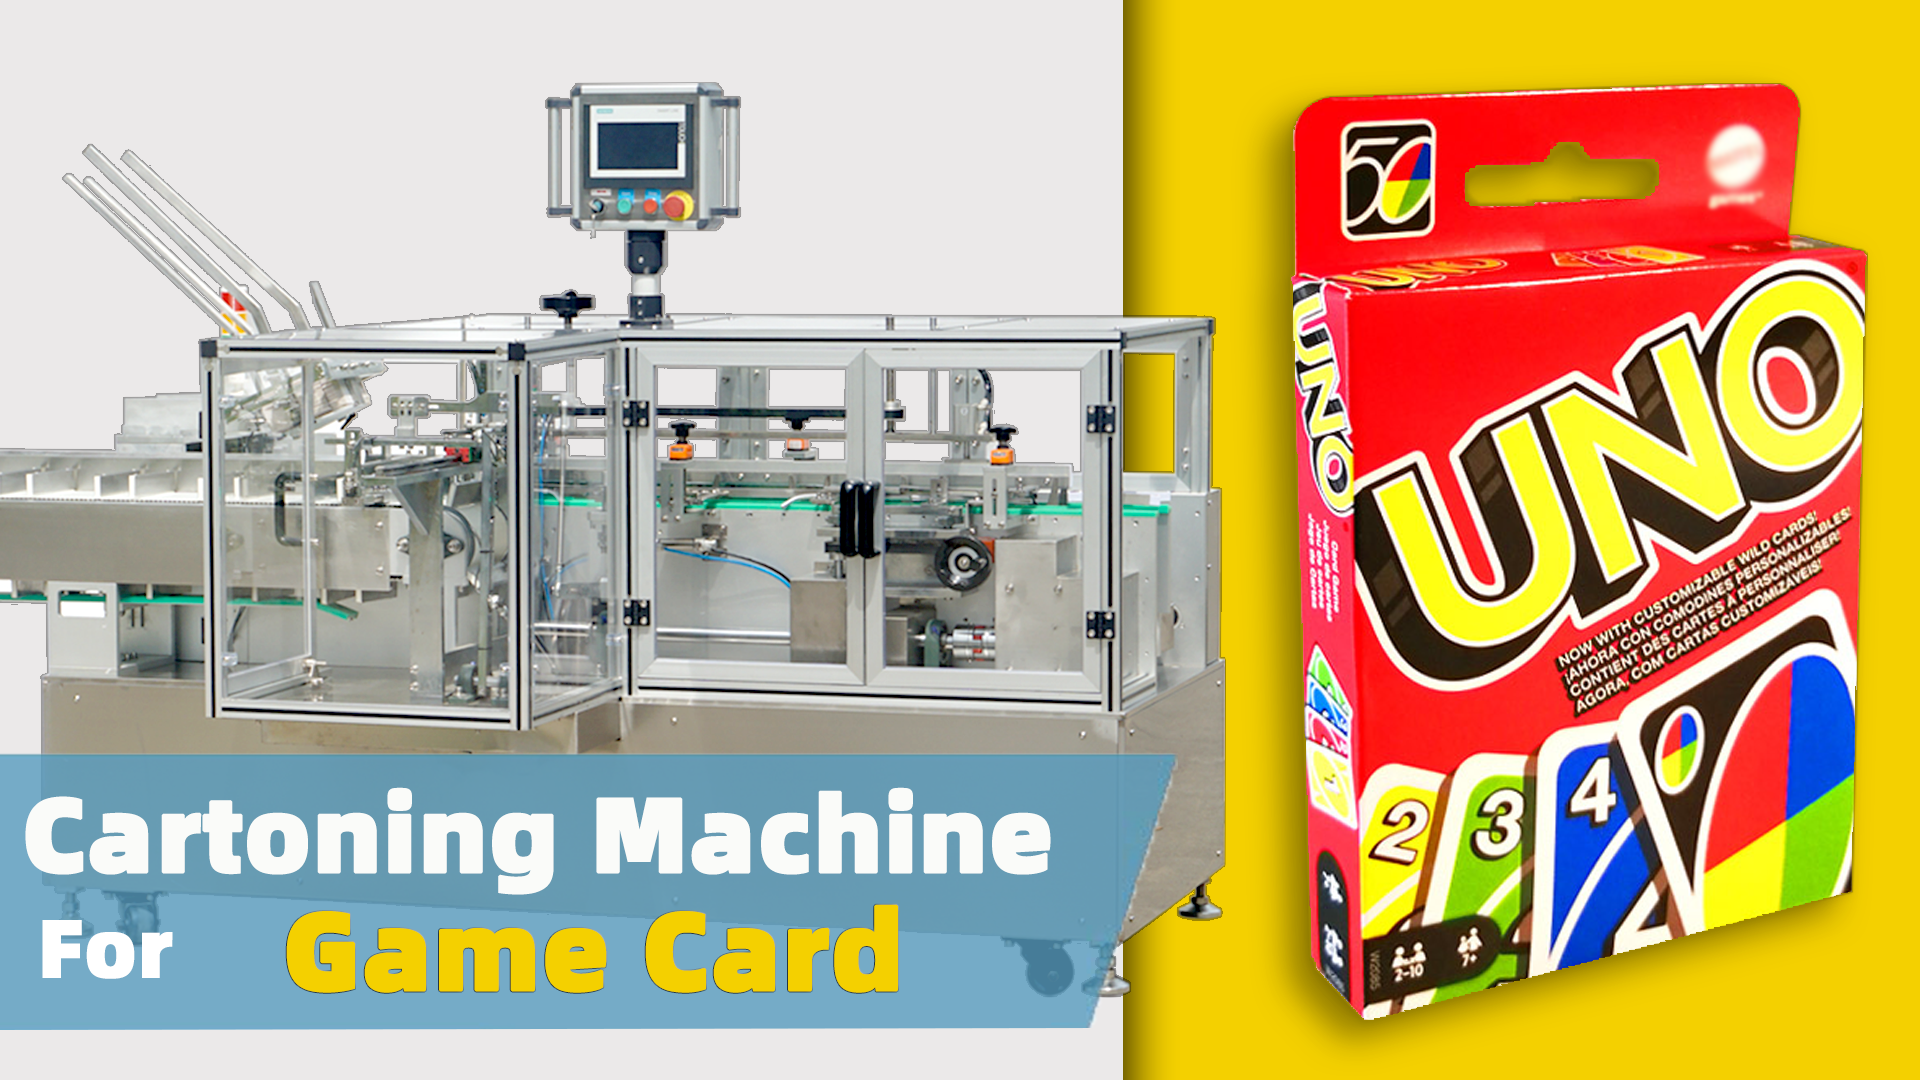 Automatic Cartoning Machine for Game Card/Top Card Games/Chess and Card Games/Best Card Games